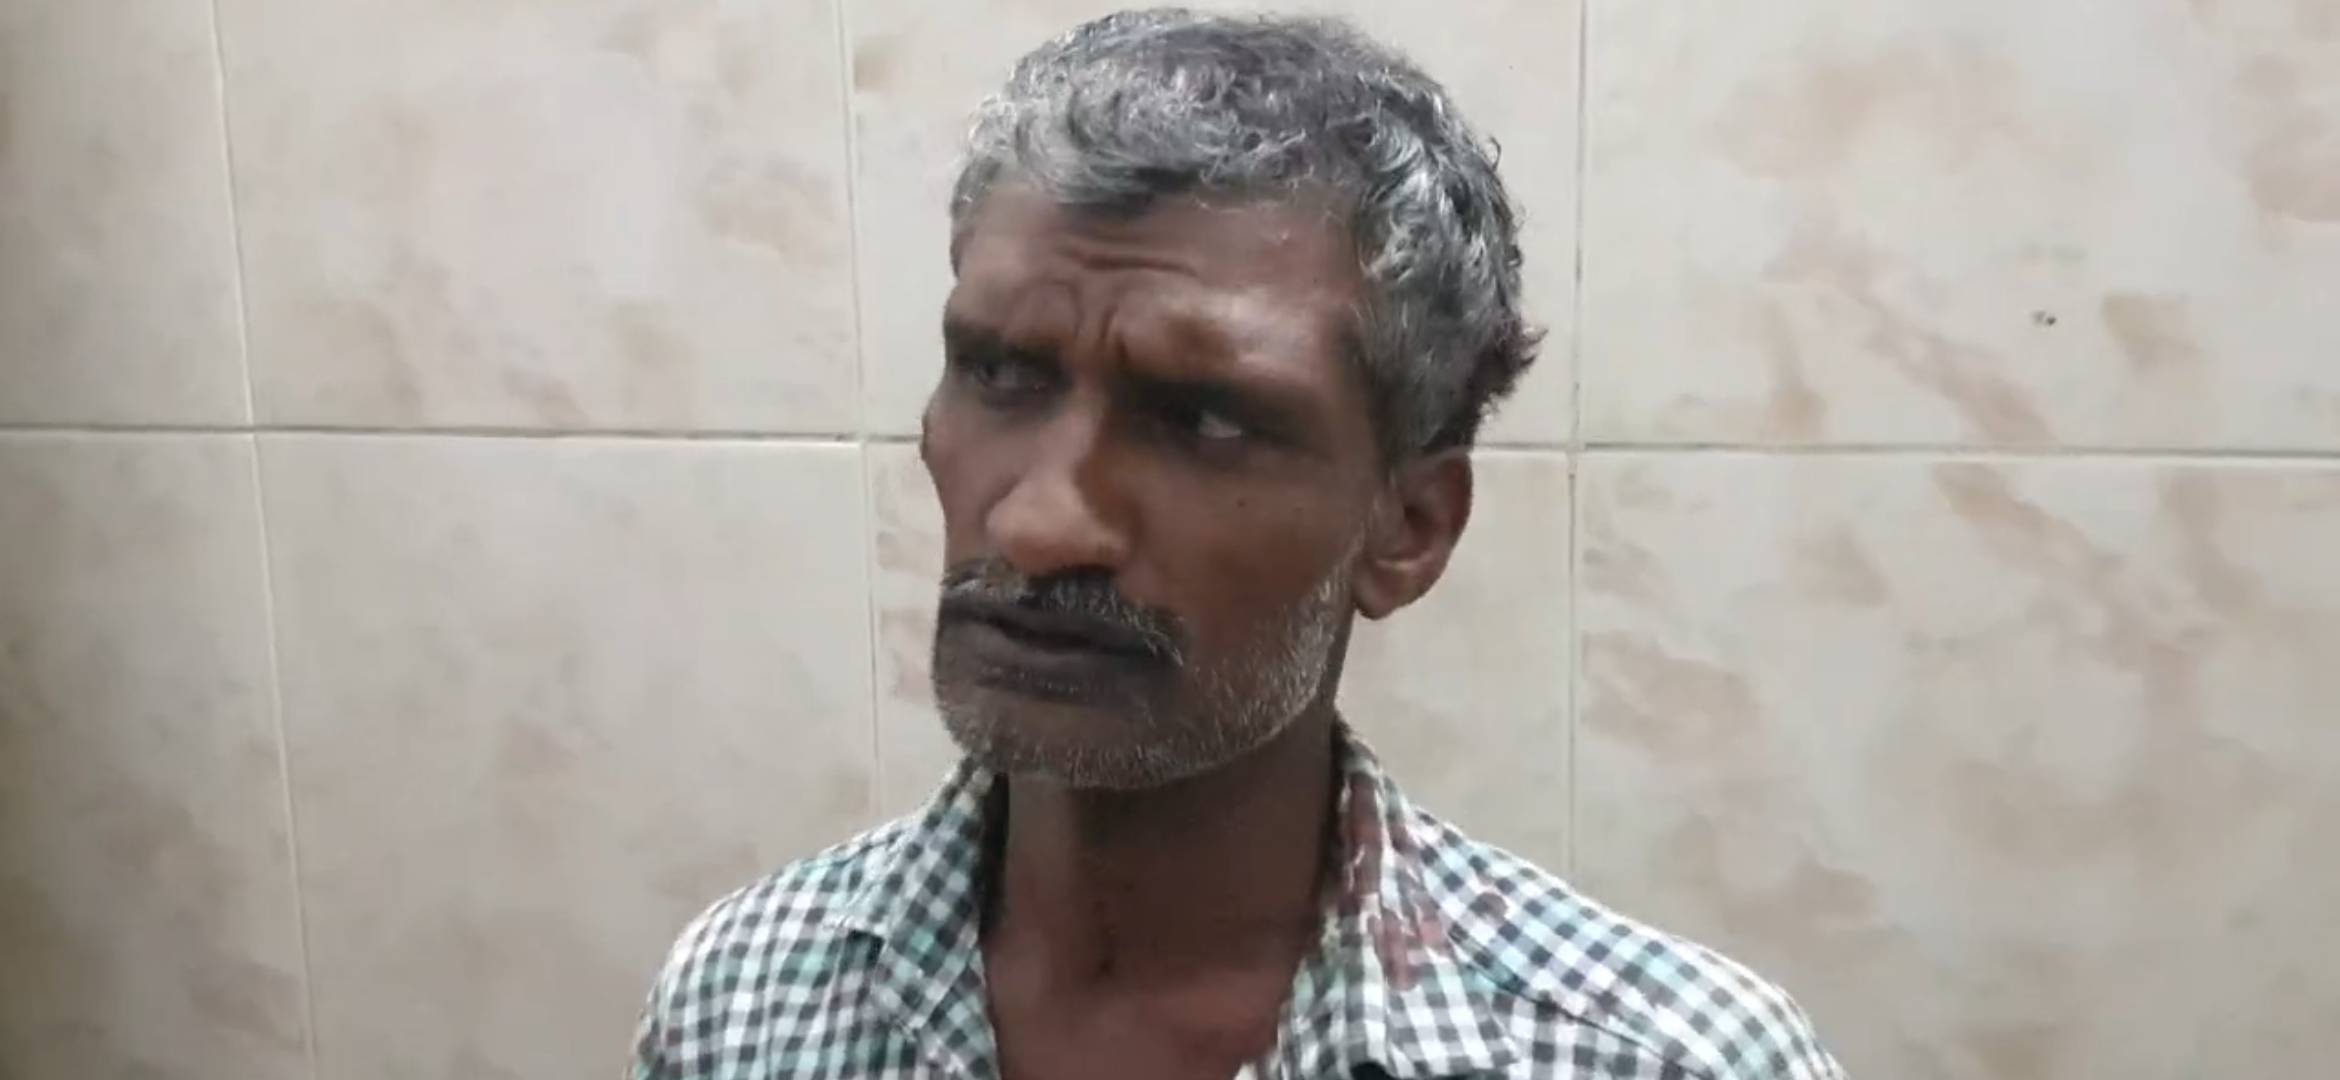 a gang attcked and robbed amount from tasmac sales person in tharapuram